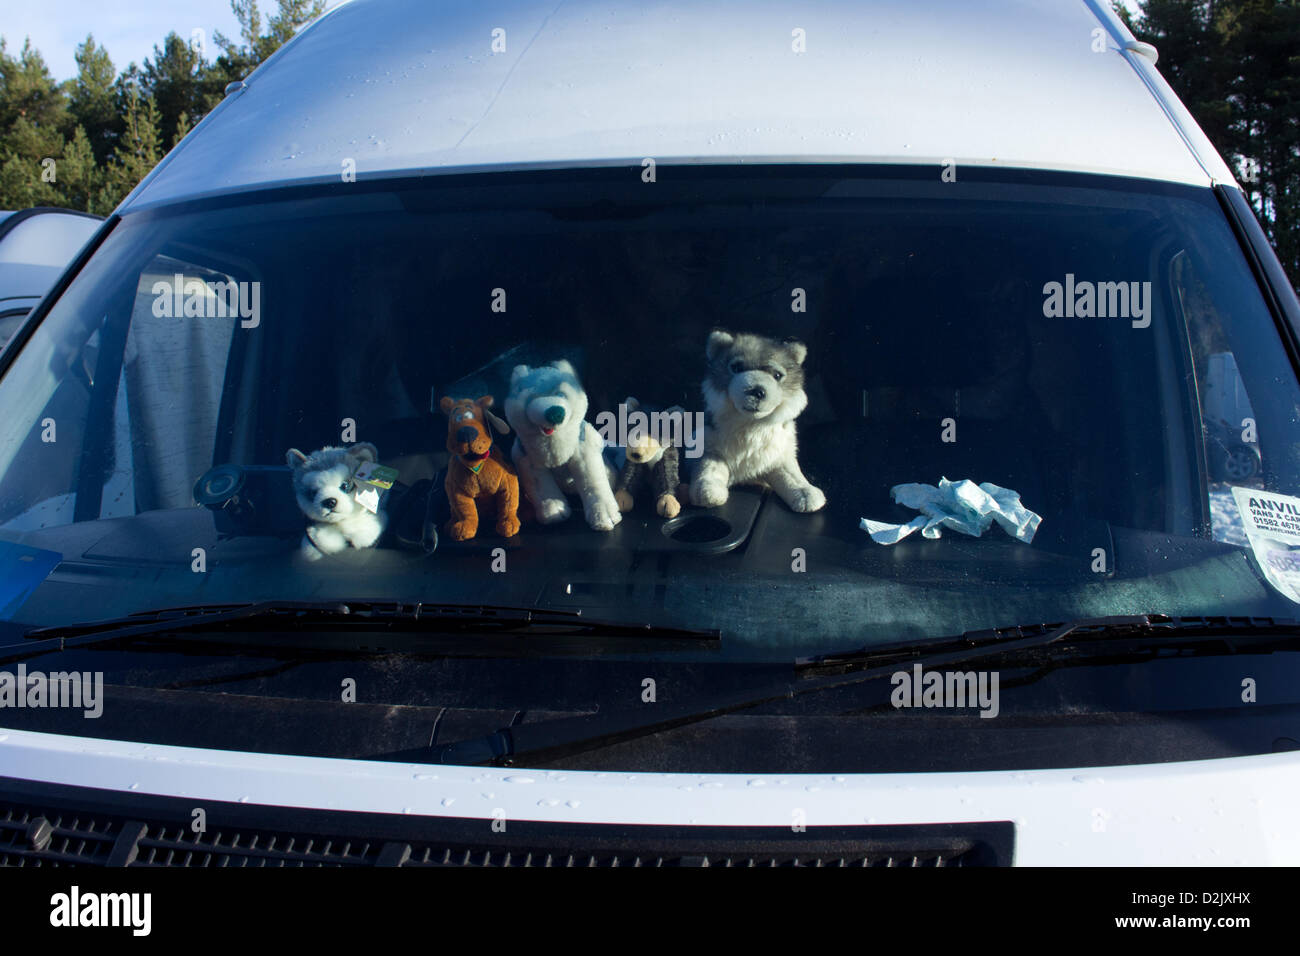 Aviemore, UK. 26th Jan, 2013. Soft toy huskies lined up along the dashboard of a van at the 30th Annual Aviemore Sled Dog Rally. This is the biggest British sled dog racing event of the year and husky enthusiasts have gathered to watch and take part. Stock Photo